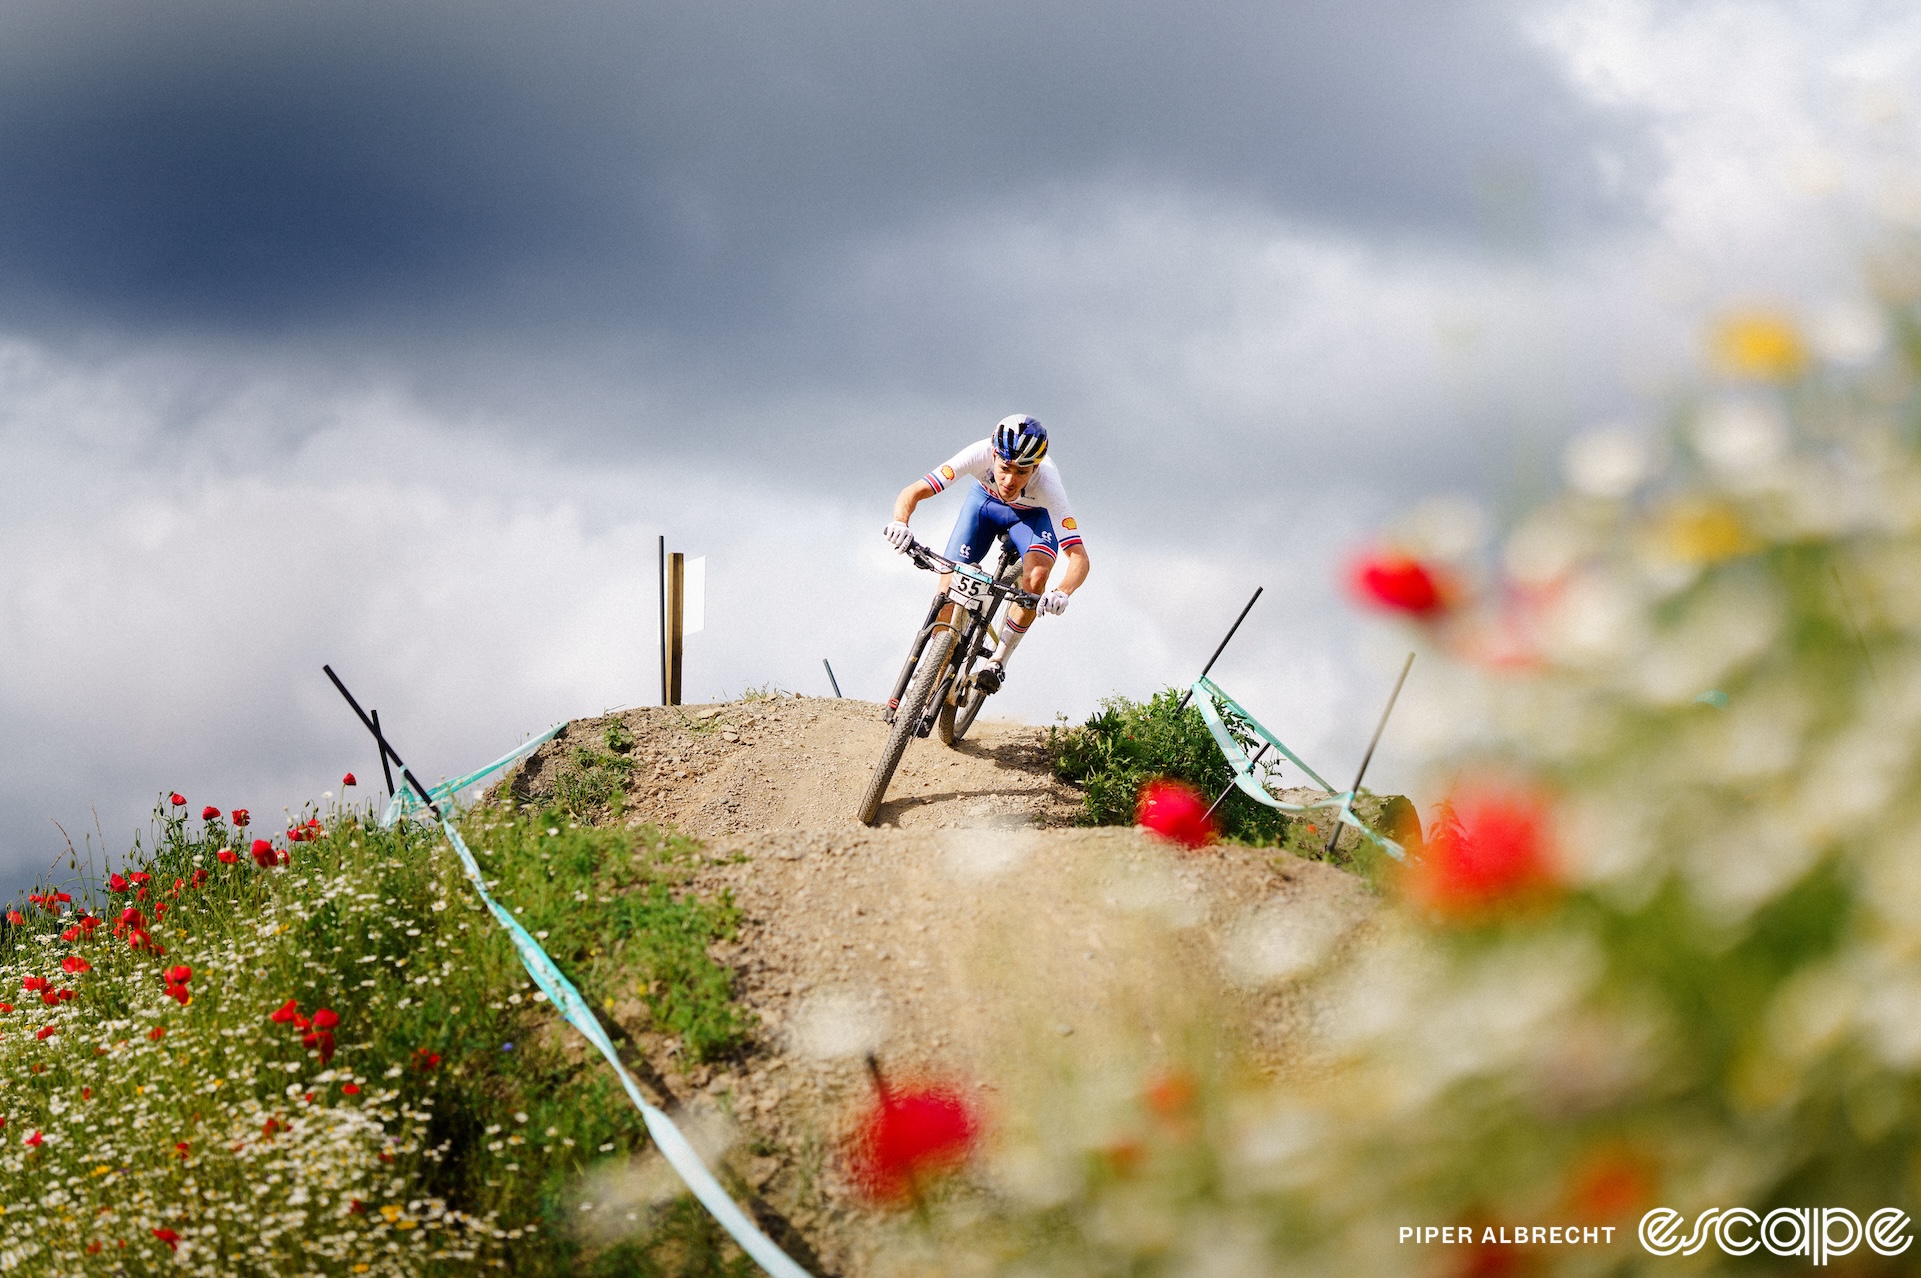 Tom Pidcock rides a berm on a descent at the 2023 World Championships in Glasgow, Scotland. He's framed by out-of-focus wildflowers, with dark skies behind.